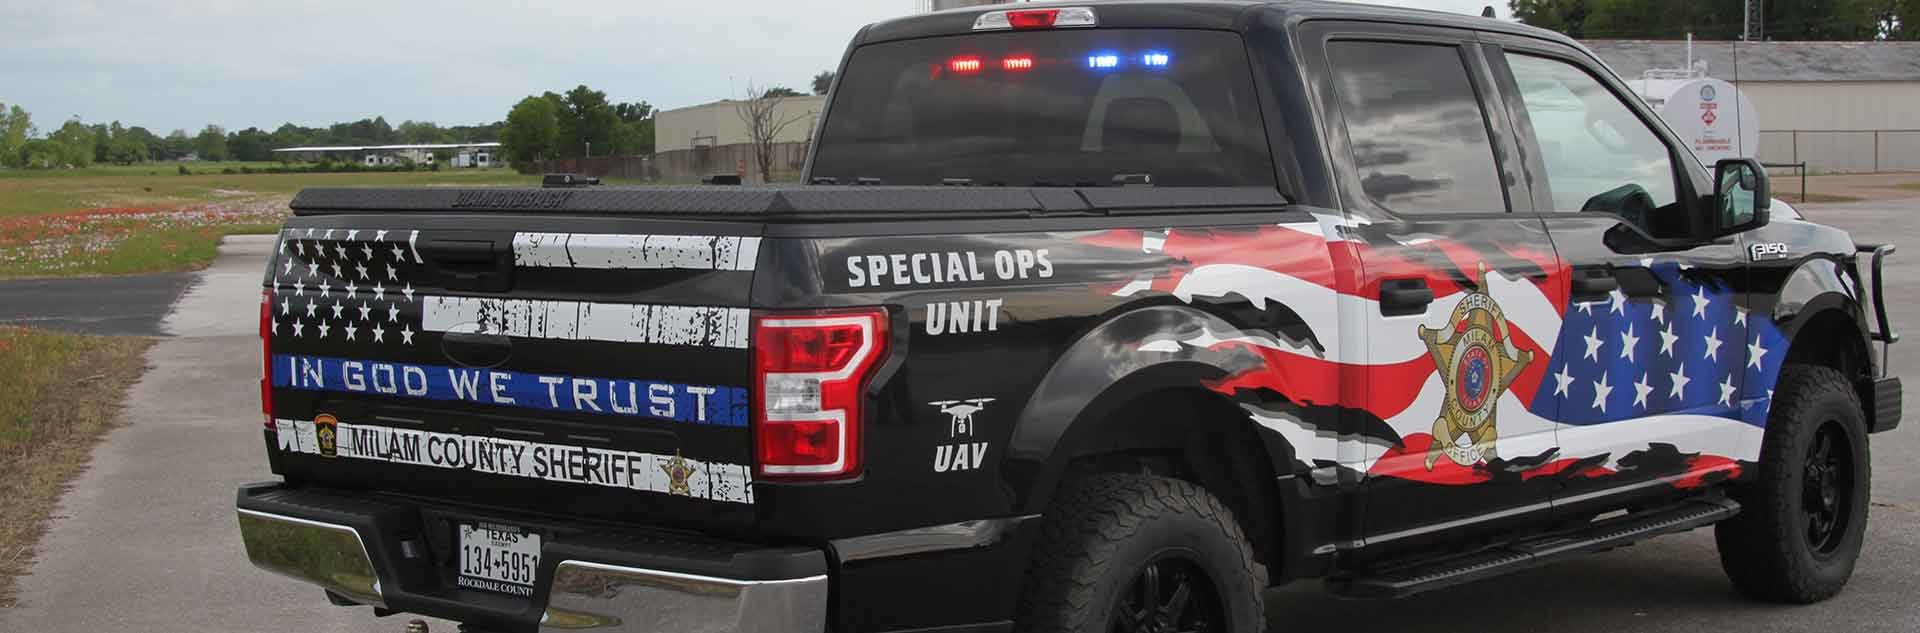 Black 4-door extended cab truck with red and blue lights in the back window. On the tail gate a black and white American flag, In God We Trust in white text, Milam County Sheriff in black text, Special Ops Unit in white text on the passenger side back top fender, and UAV with an outline of a drone in white text on the passenger side back bottom fender. On the passenger side back door is the Milam County Sheriff’s Office badge. Across the front and back passenger side doors is a partial American Flag.